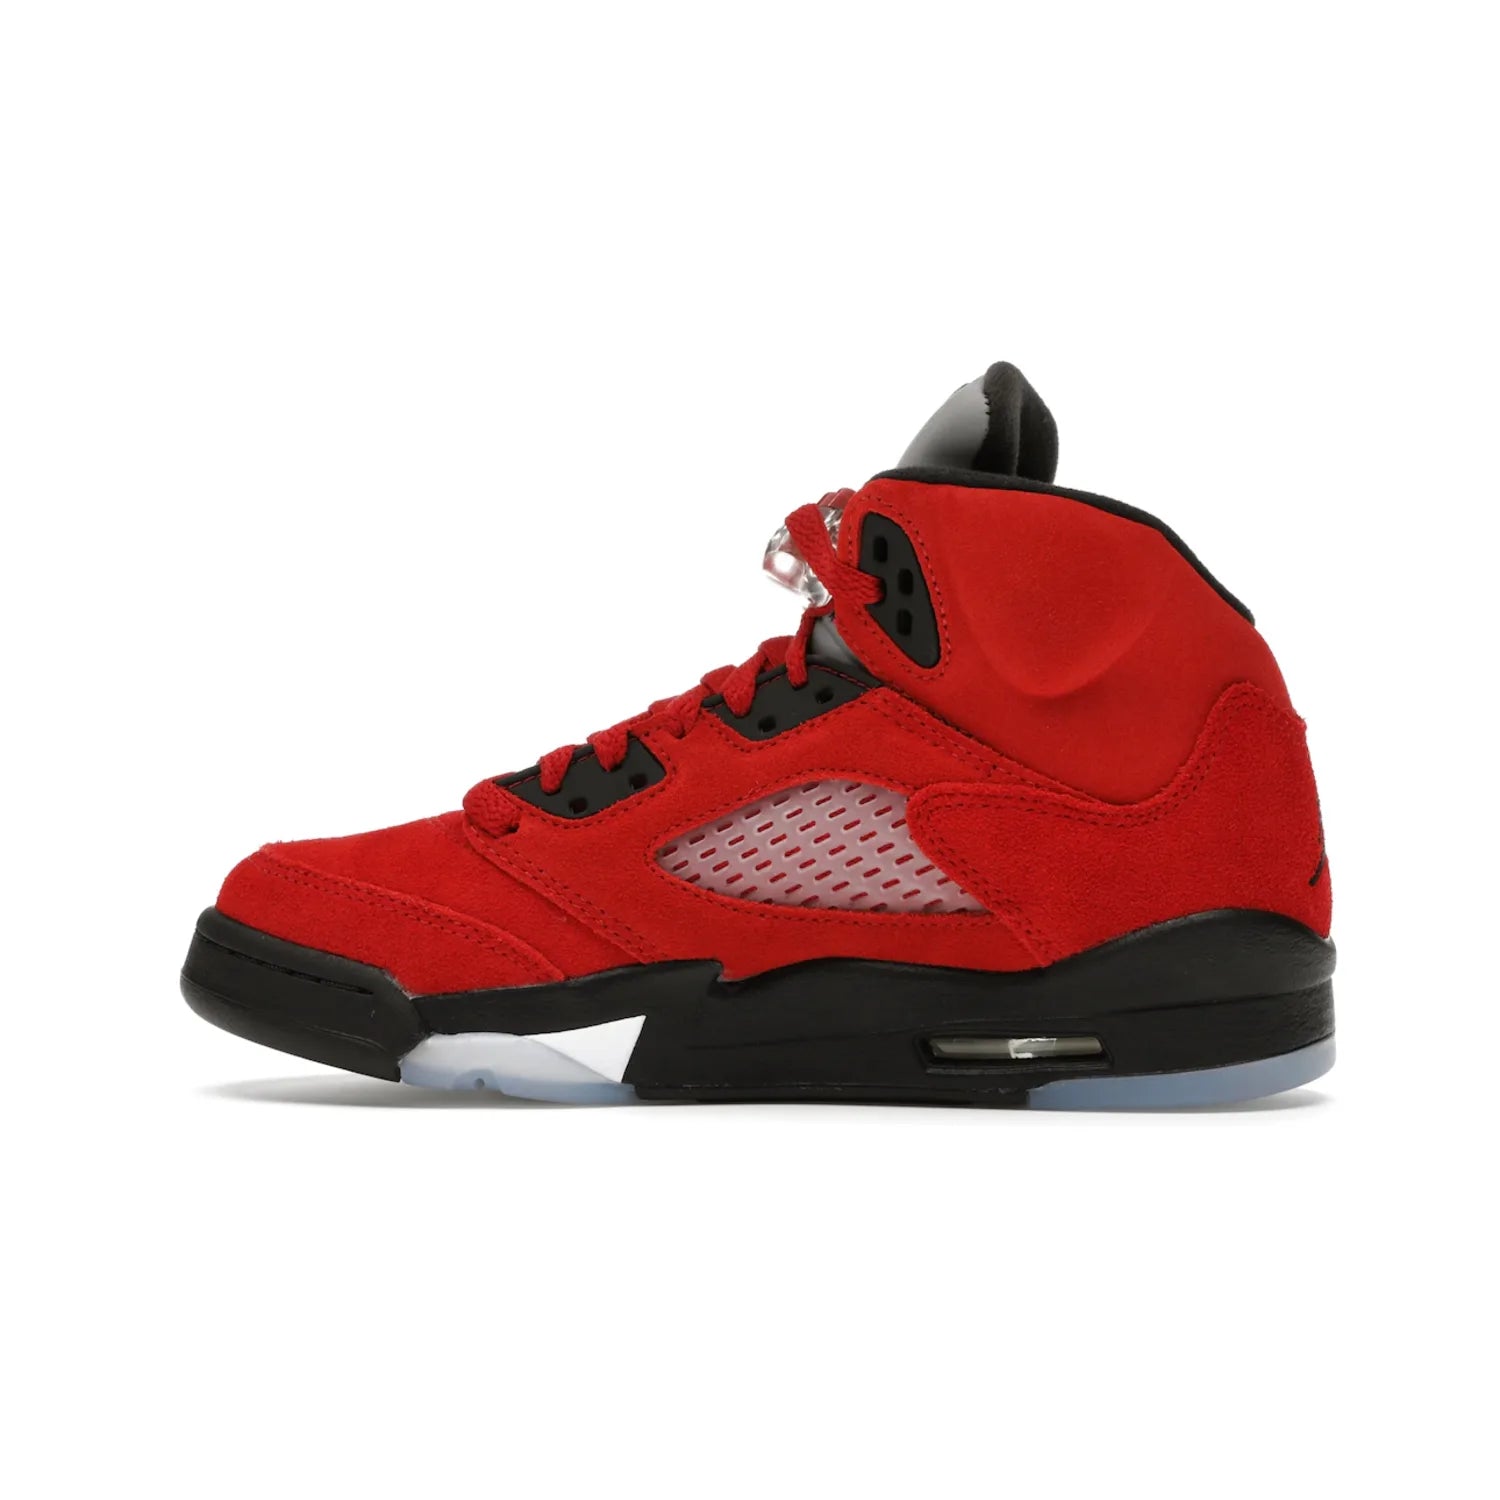 Jordan 5 Retro Raging Bull Red (2021) (GS) - Image 20 - Only at www.BallersClubKickz.com - Jordan 5 Retro Raging Bulls Red 2021 GS. Varsity Red suede upper with embroidered number 23, black leather detail, red laces, and midsole with air cushioning. Jumpman logos on tongue, heel, and outsole. On-trend streetwear and basketball style. Released April 10, 2021.